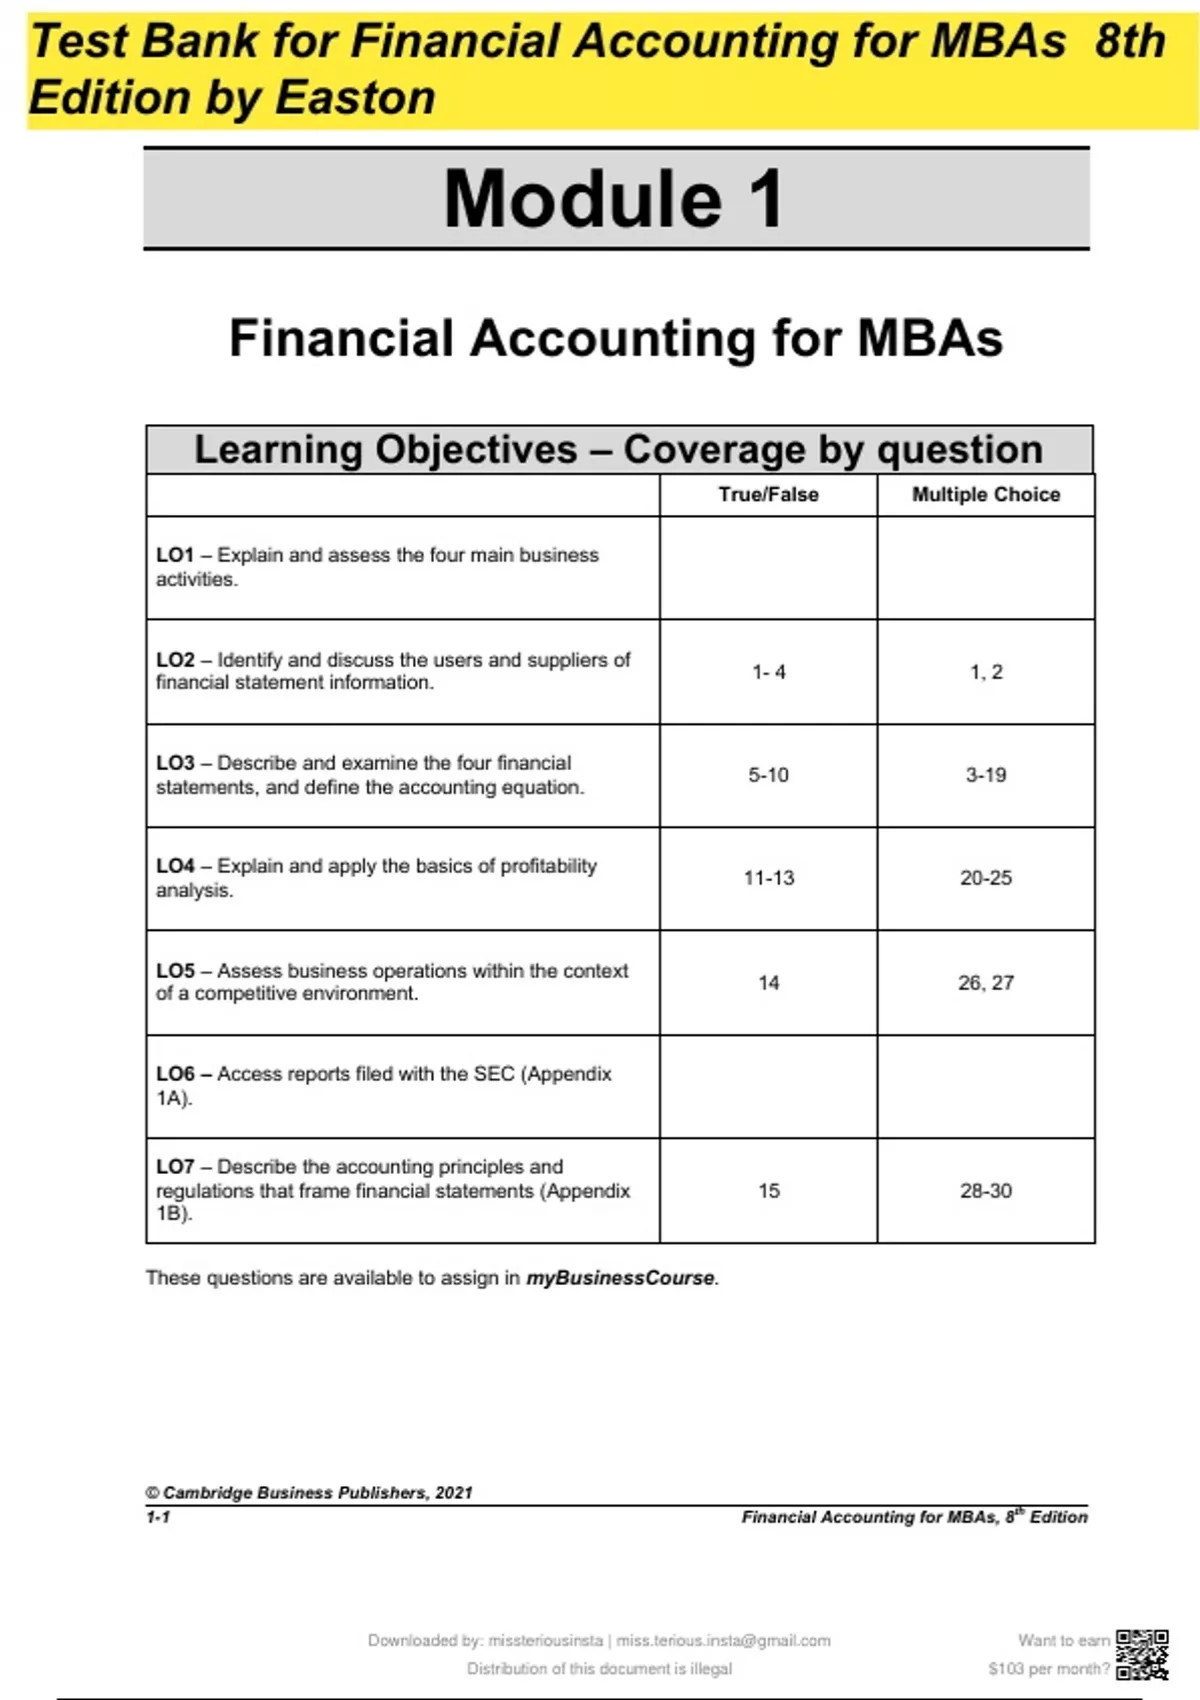 Financial Accounting for MBAs, 8e本